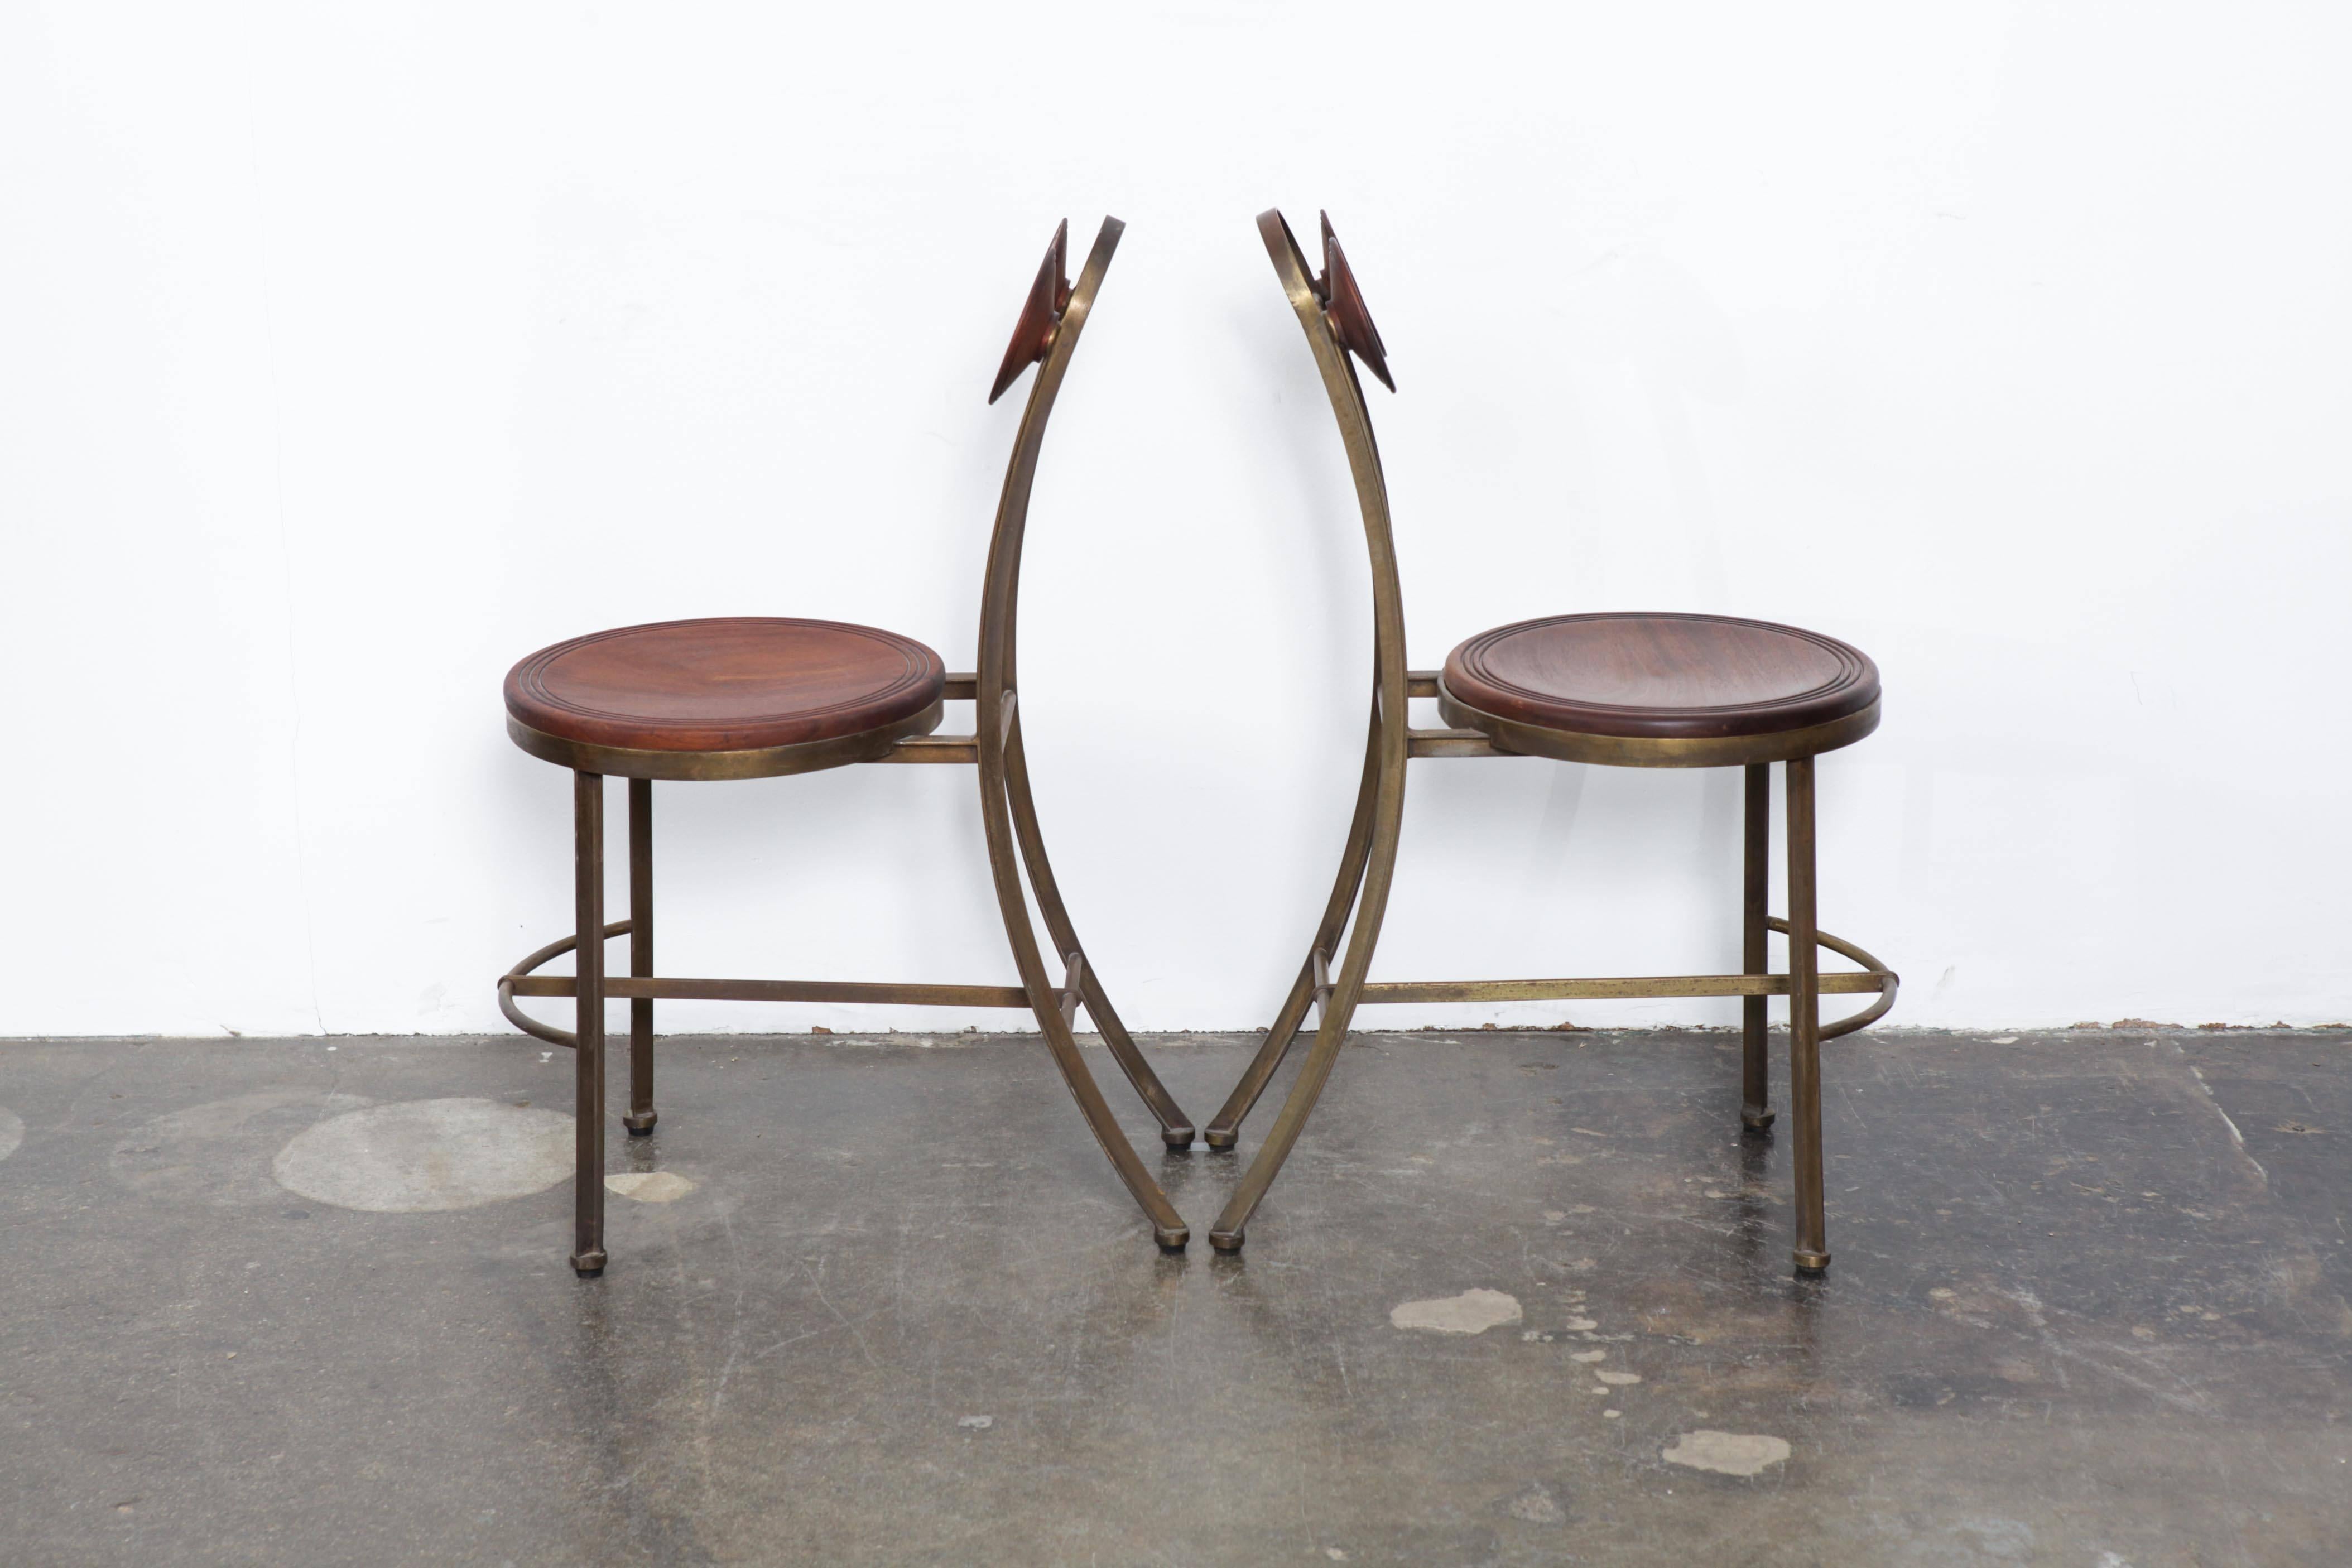 Very unique pair of solid bronze and freijo wood chairs by Pedro Useche, Brazil, 1960s. The solid wood seat and matching solid wood circular backs are finished in a natural oil finish.